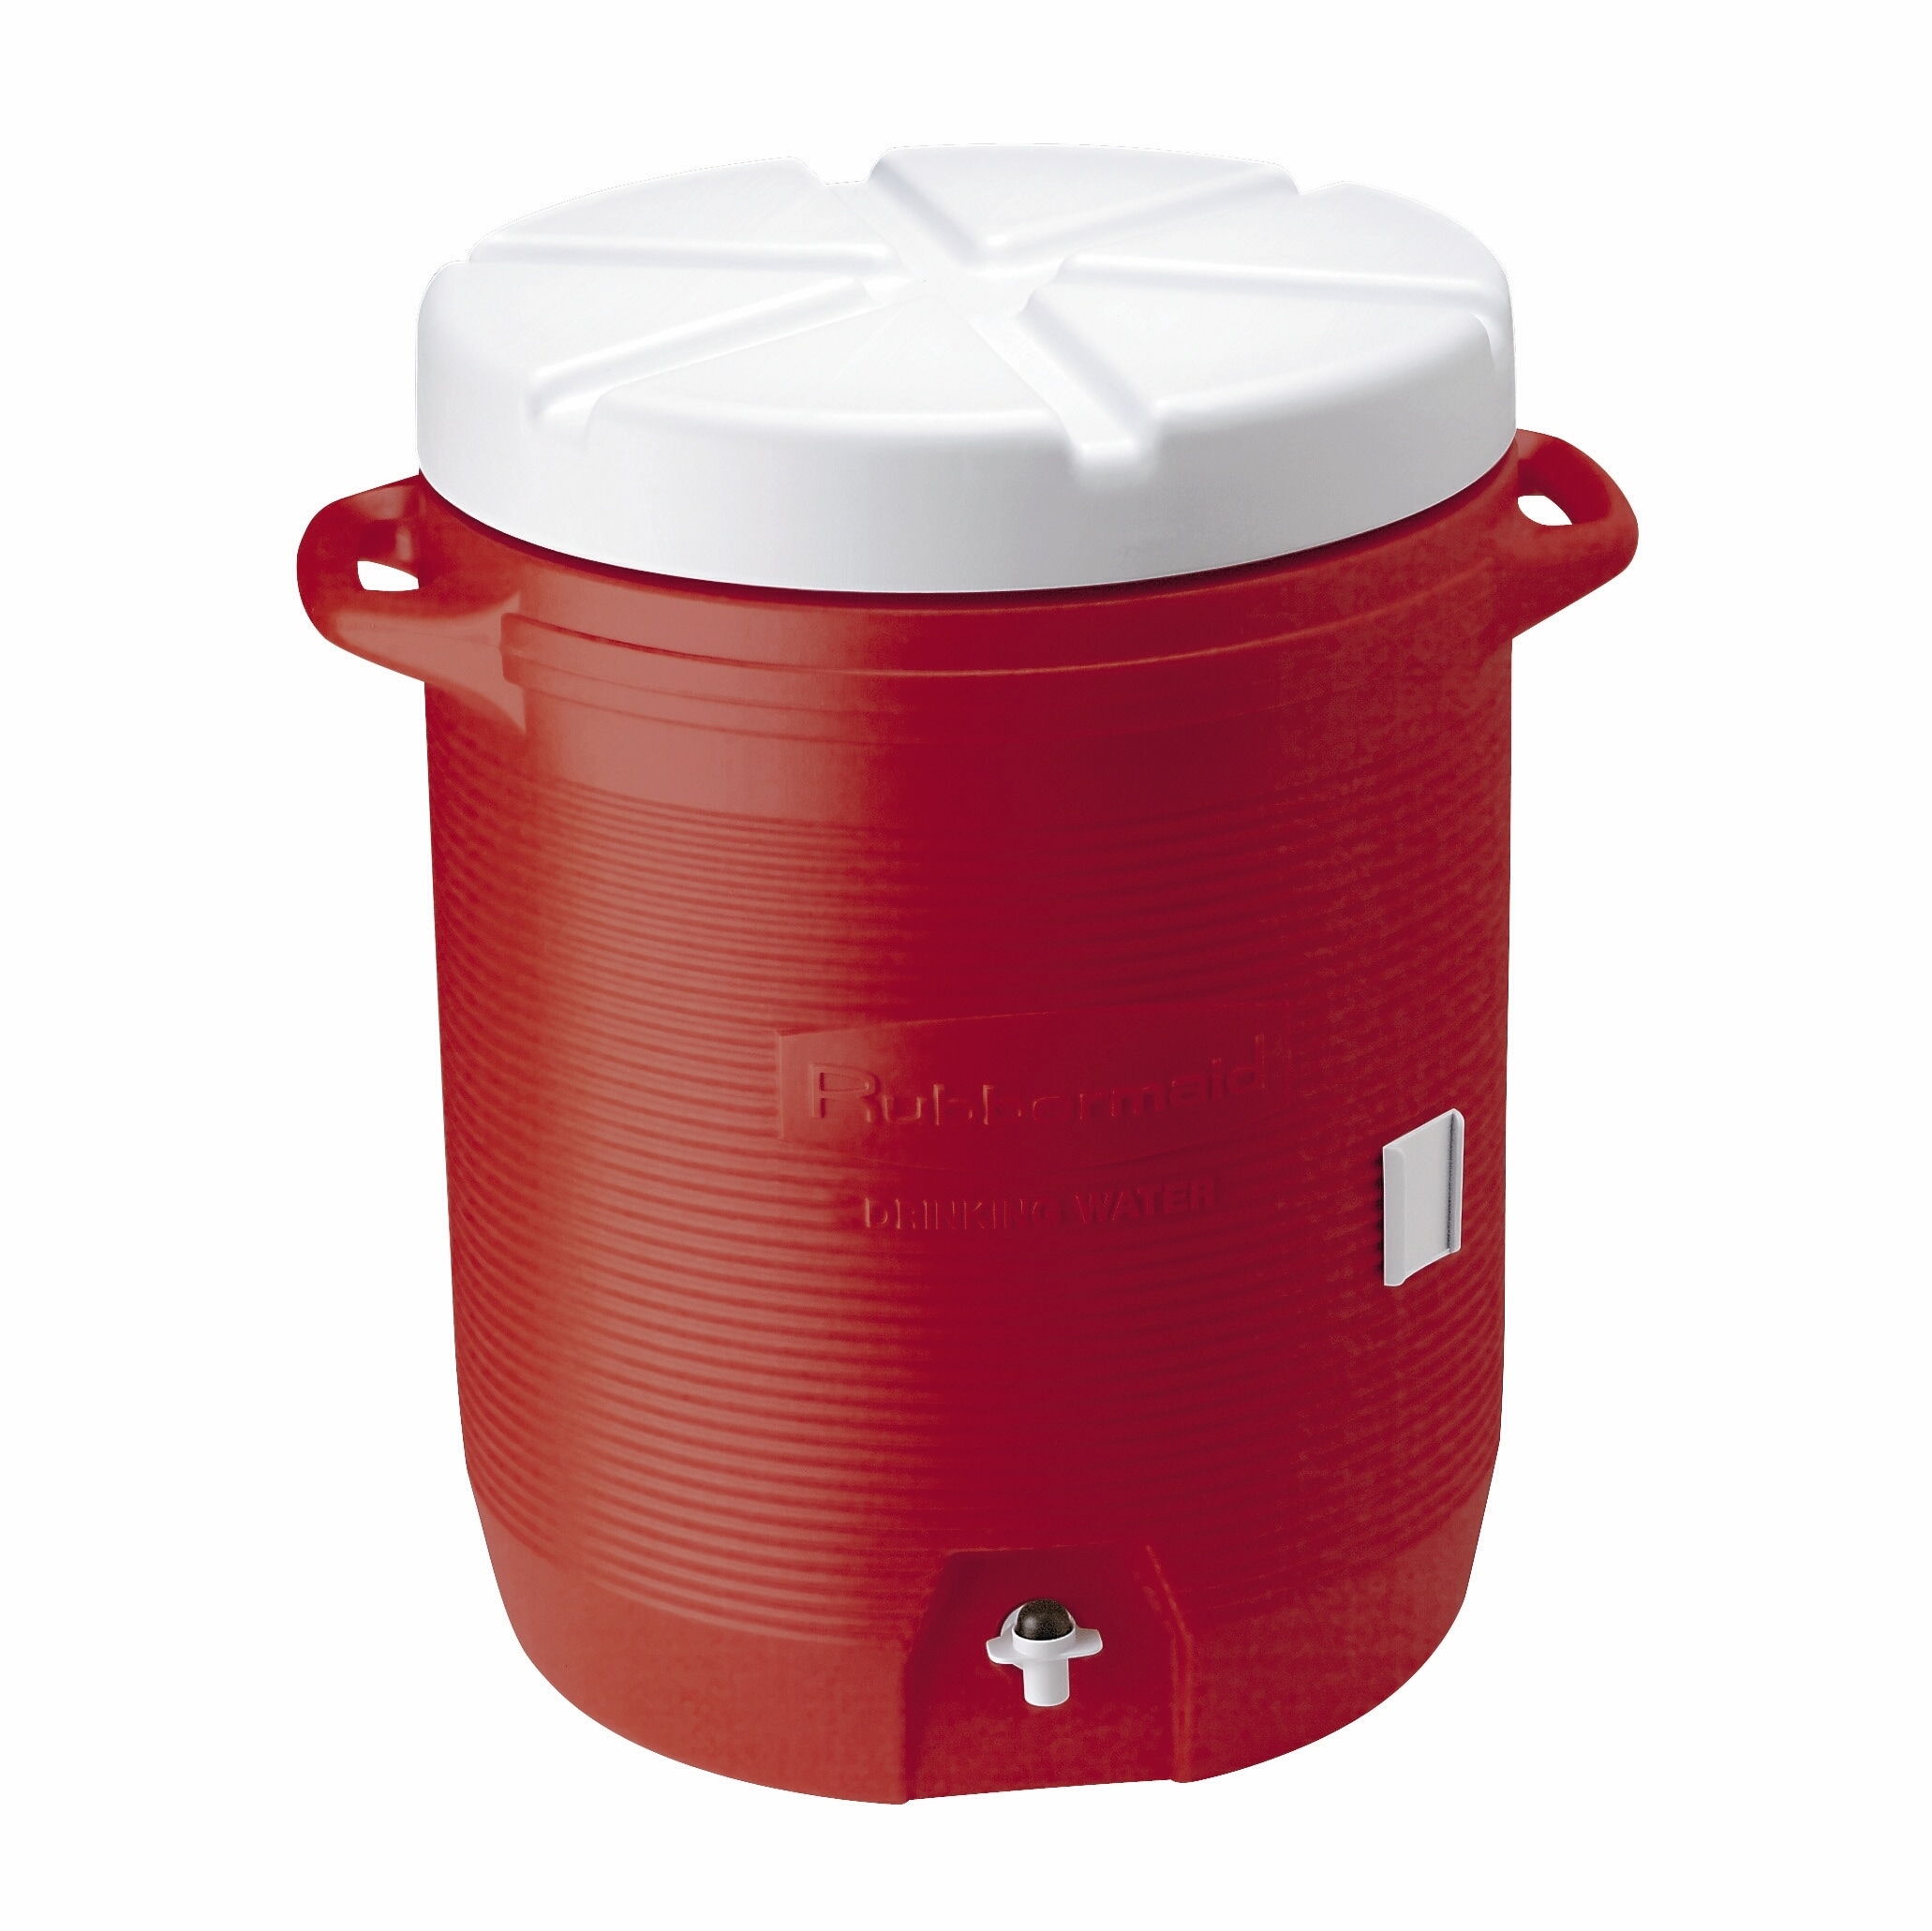 10 Gallon Rubbermaid Cooler - Baer Auctioneers - Realty, LLC